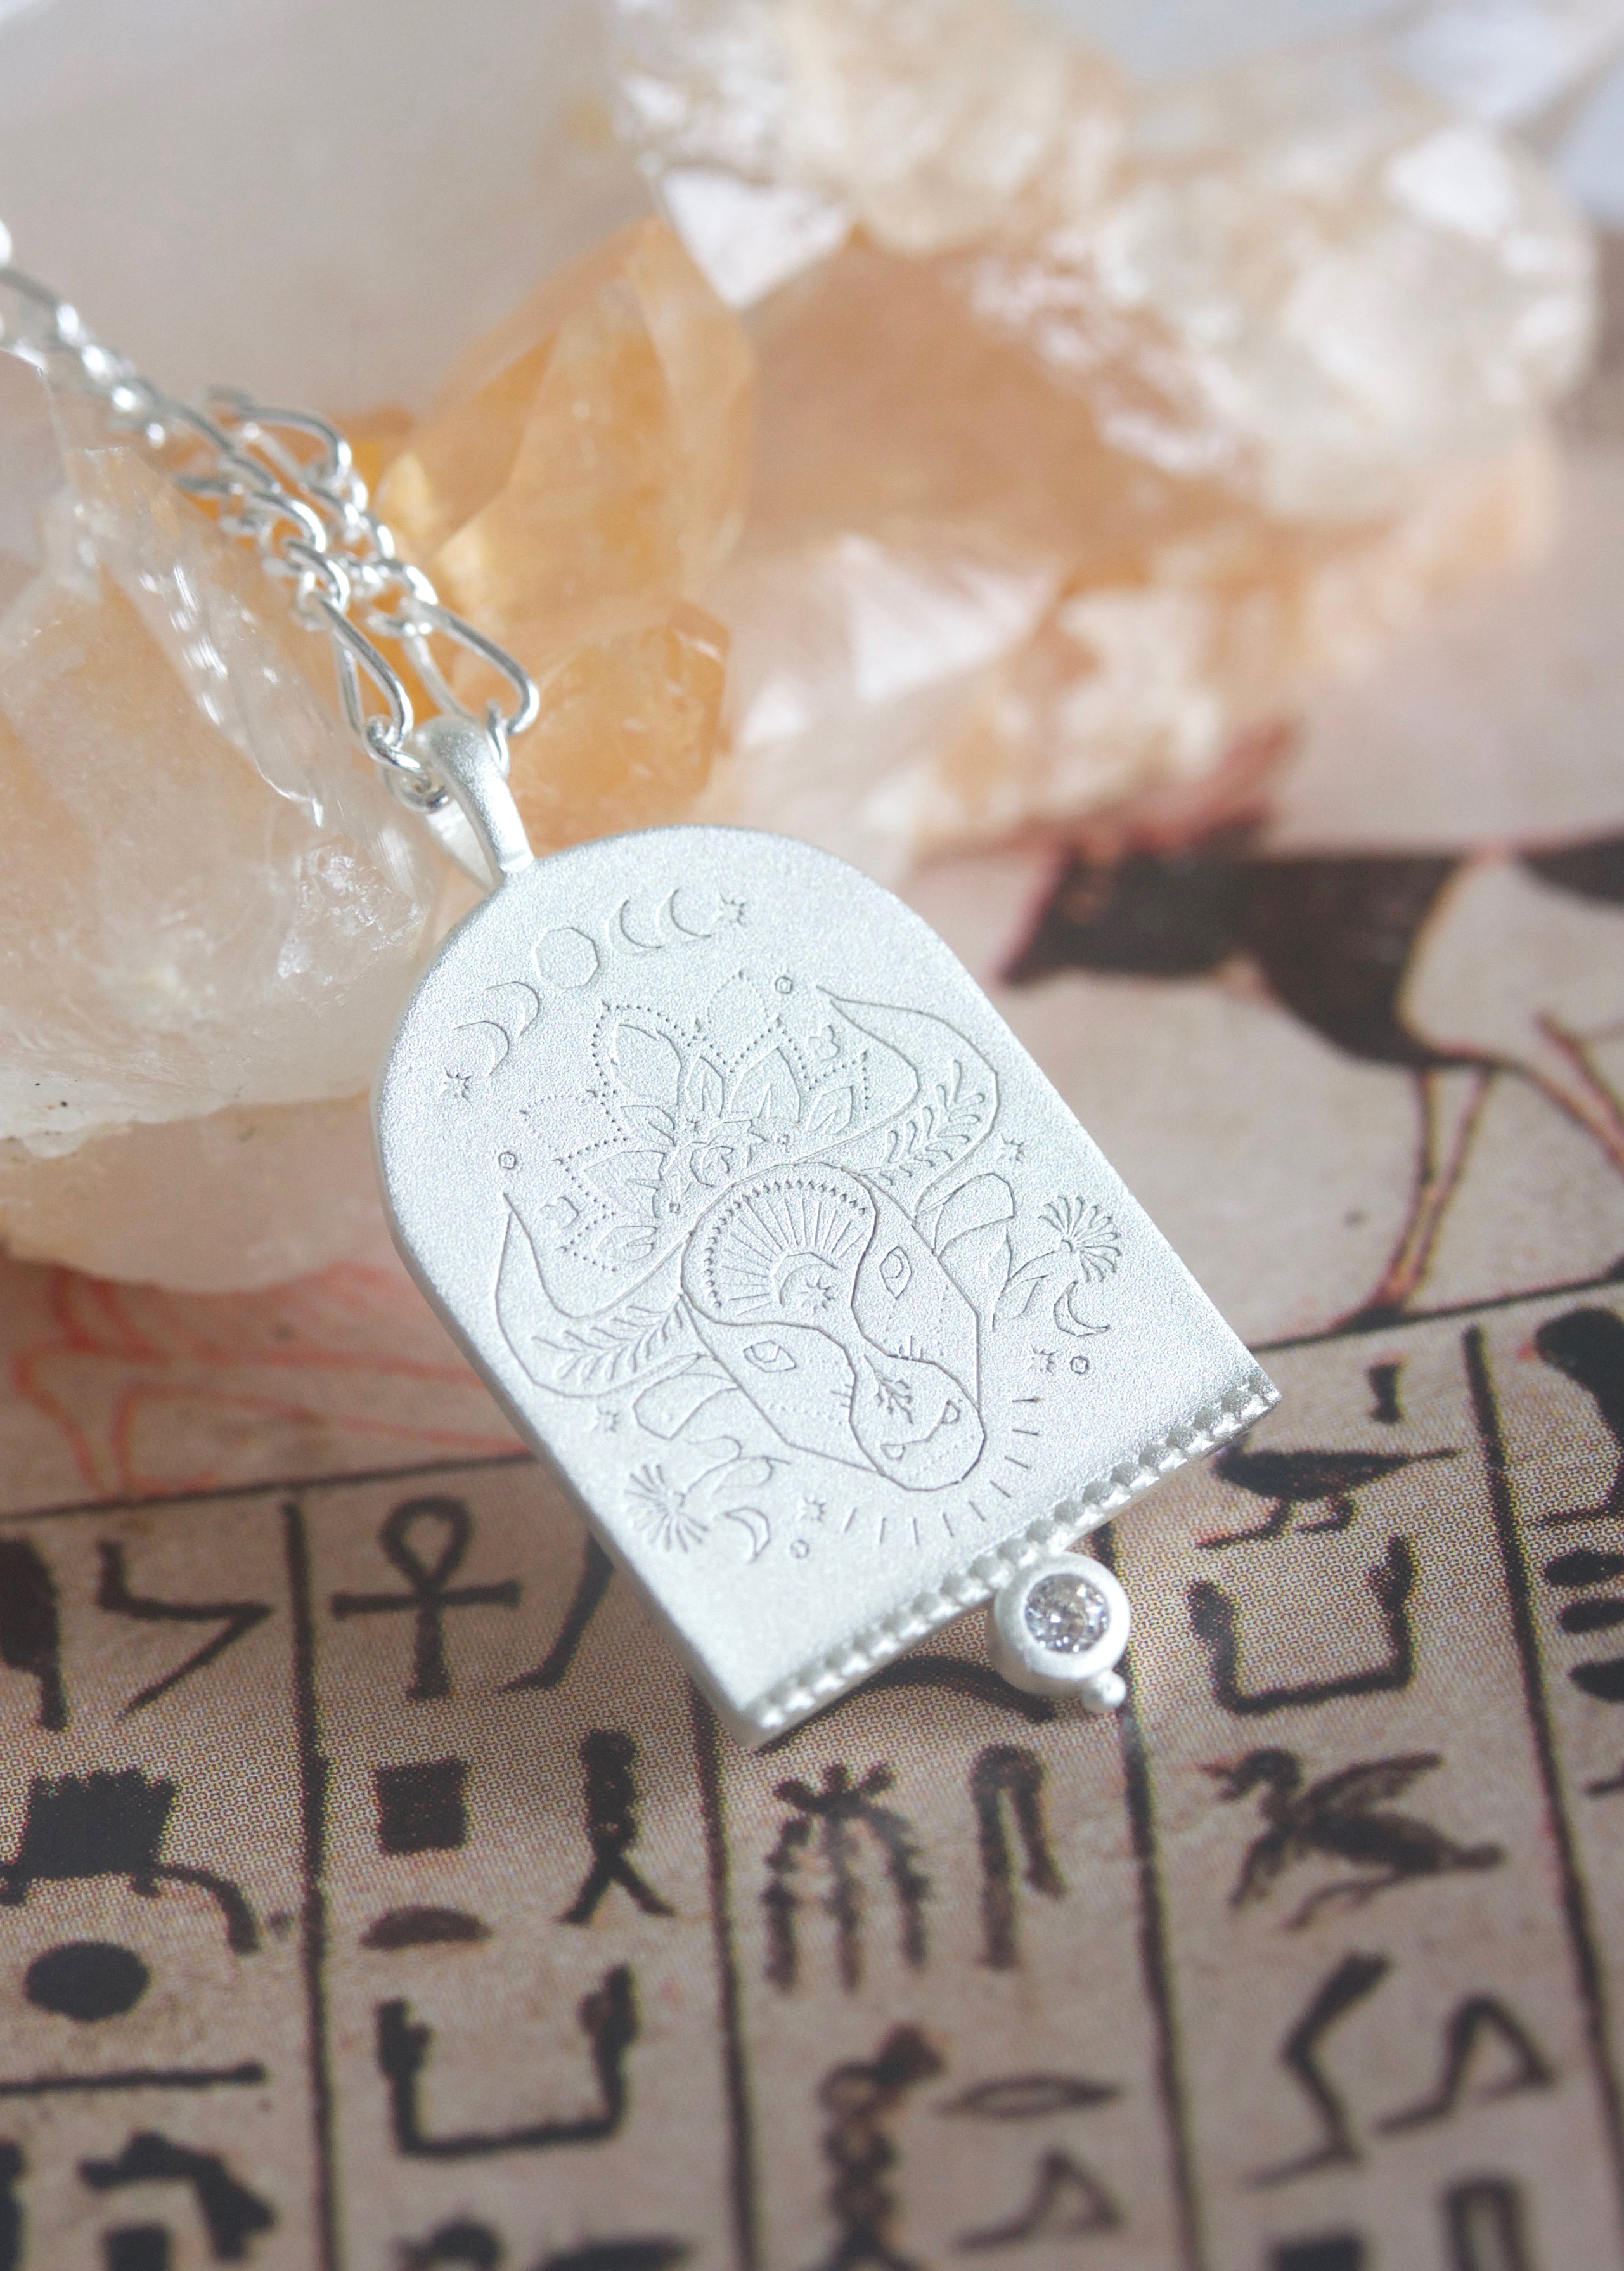 Taurus Zodiac starsign necklace in sterling silver jewellery from NZ